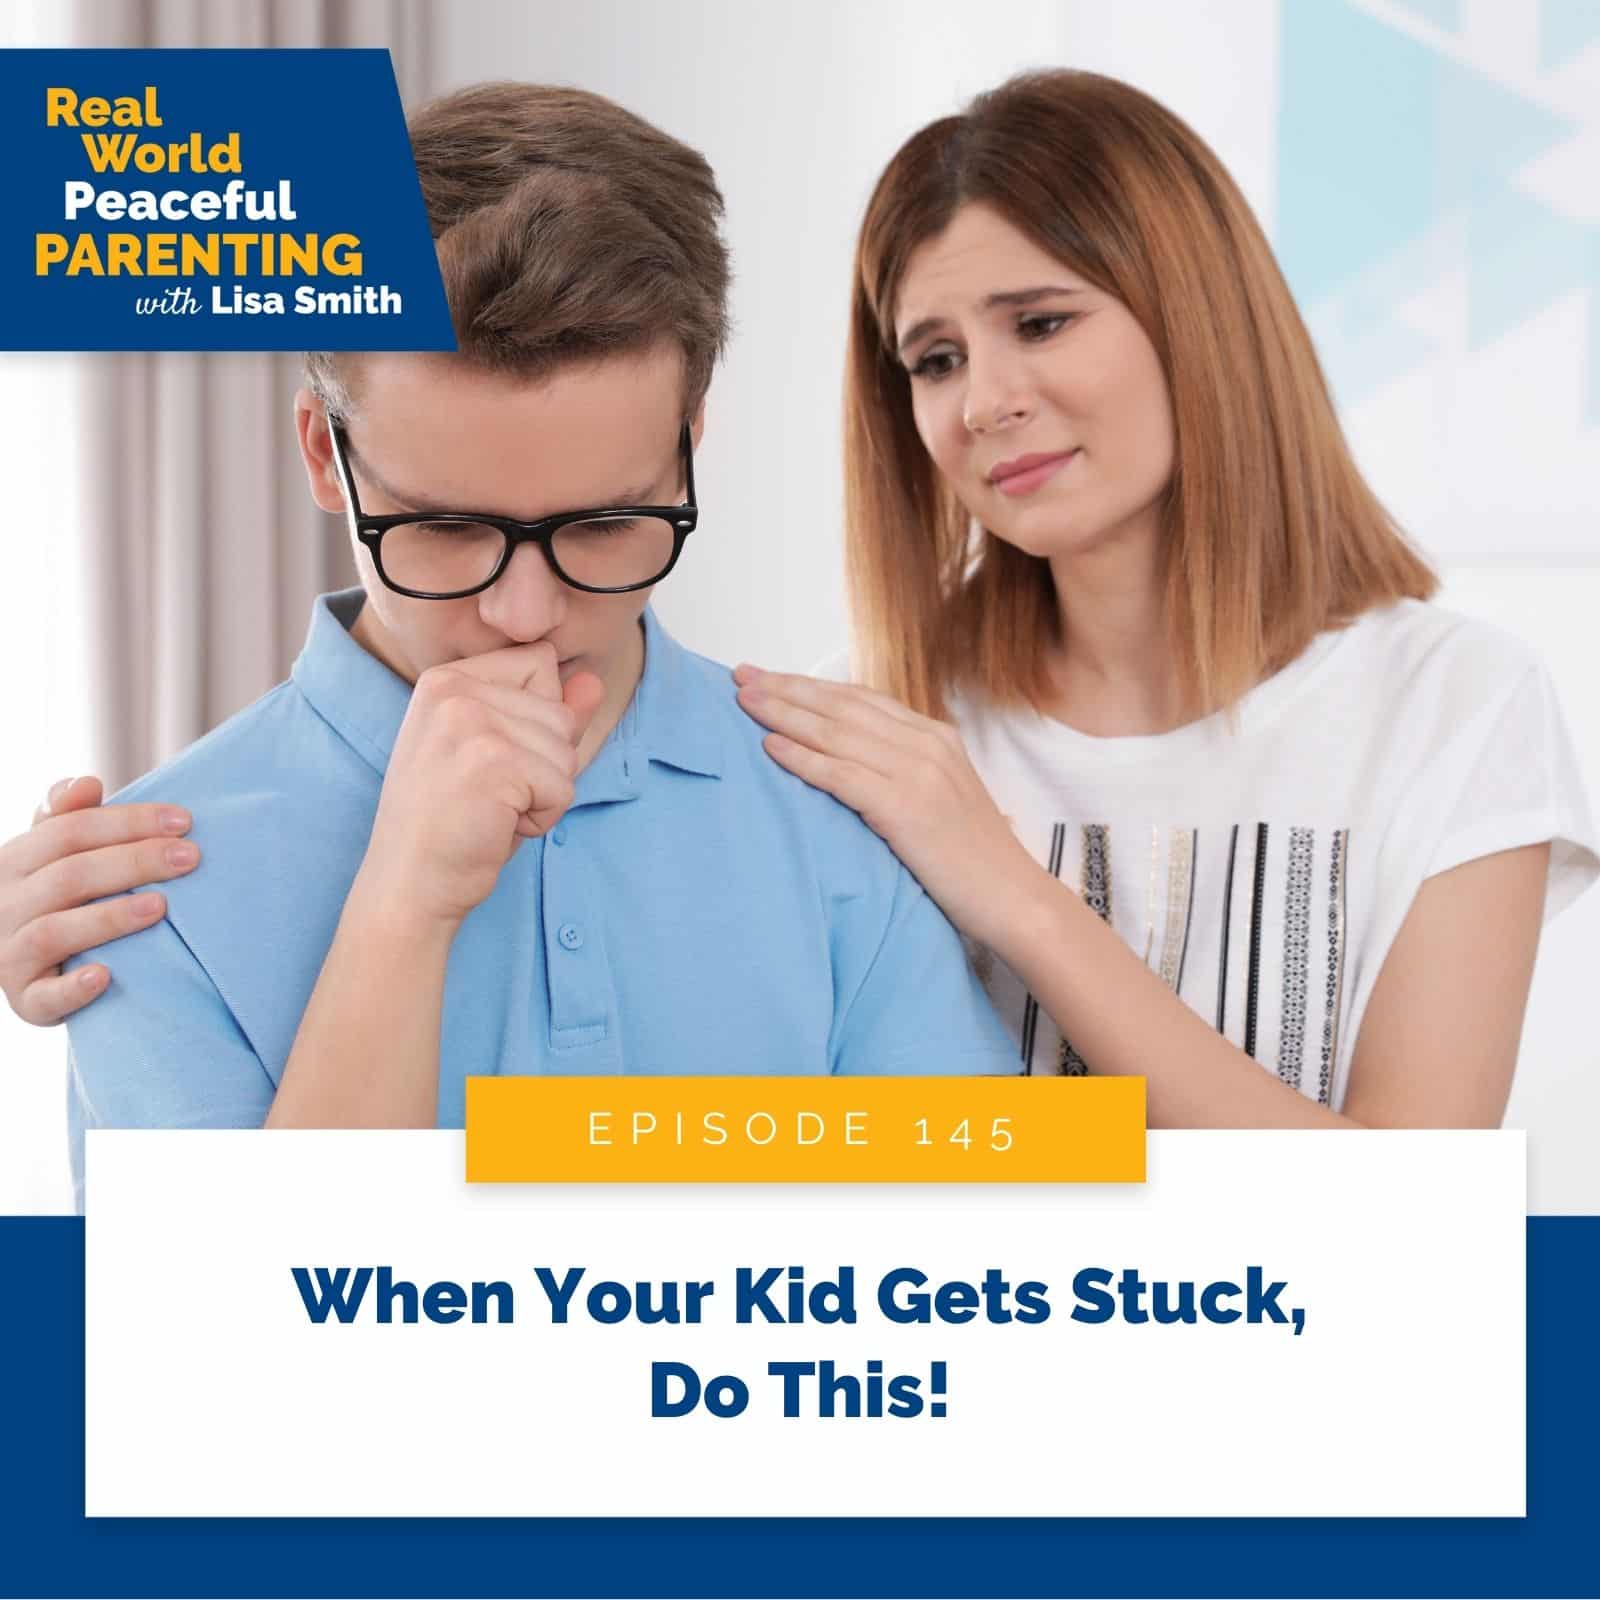 Real World Peaceful Parenting Lisa Smith | When Your Kid Gets Stuck, Do This!